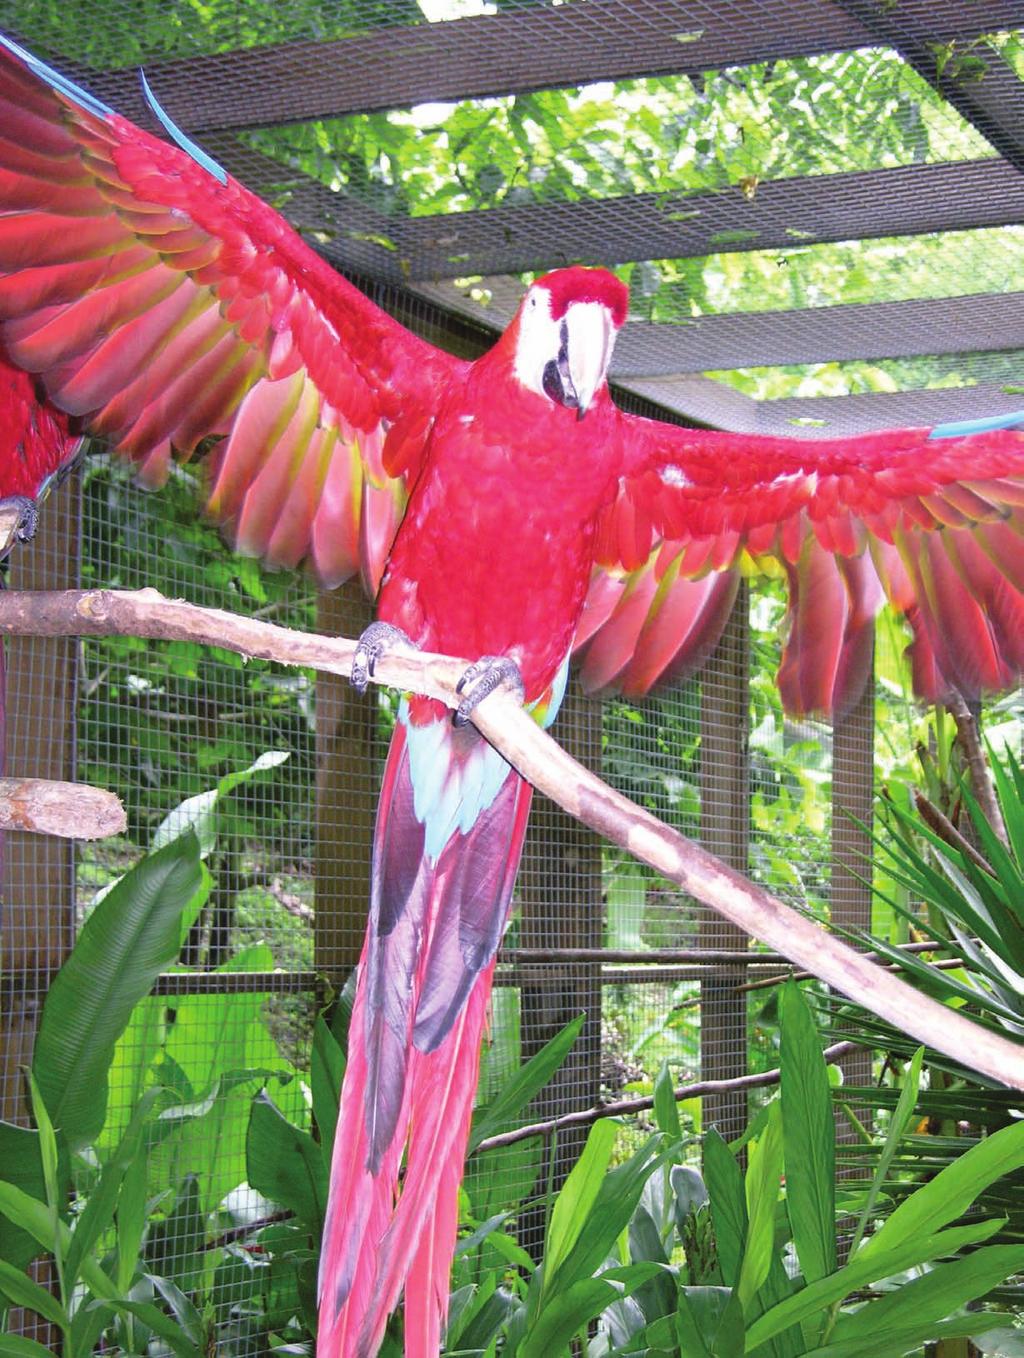 16 dig Two macaws: At left is a magnificent scarlet